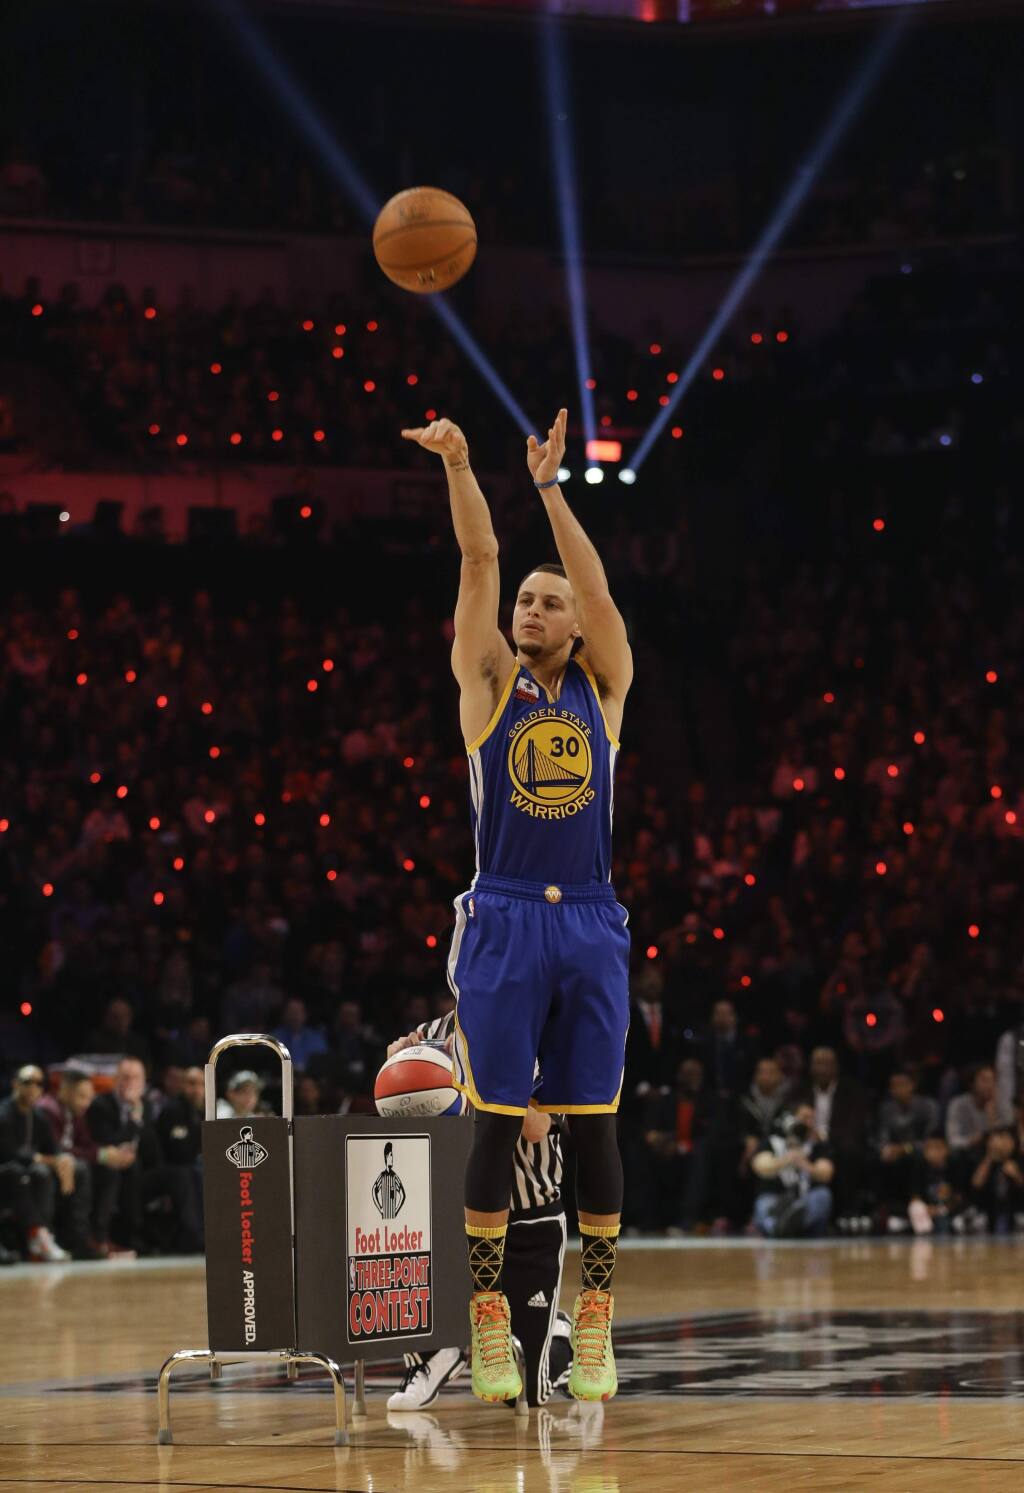 Watch: Stephen Curry beats Klay Thompson in giant three-point contest